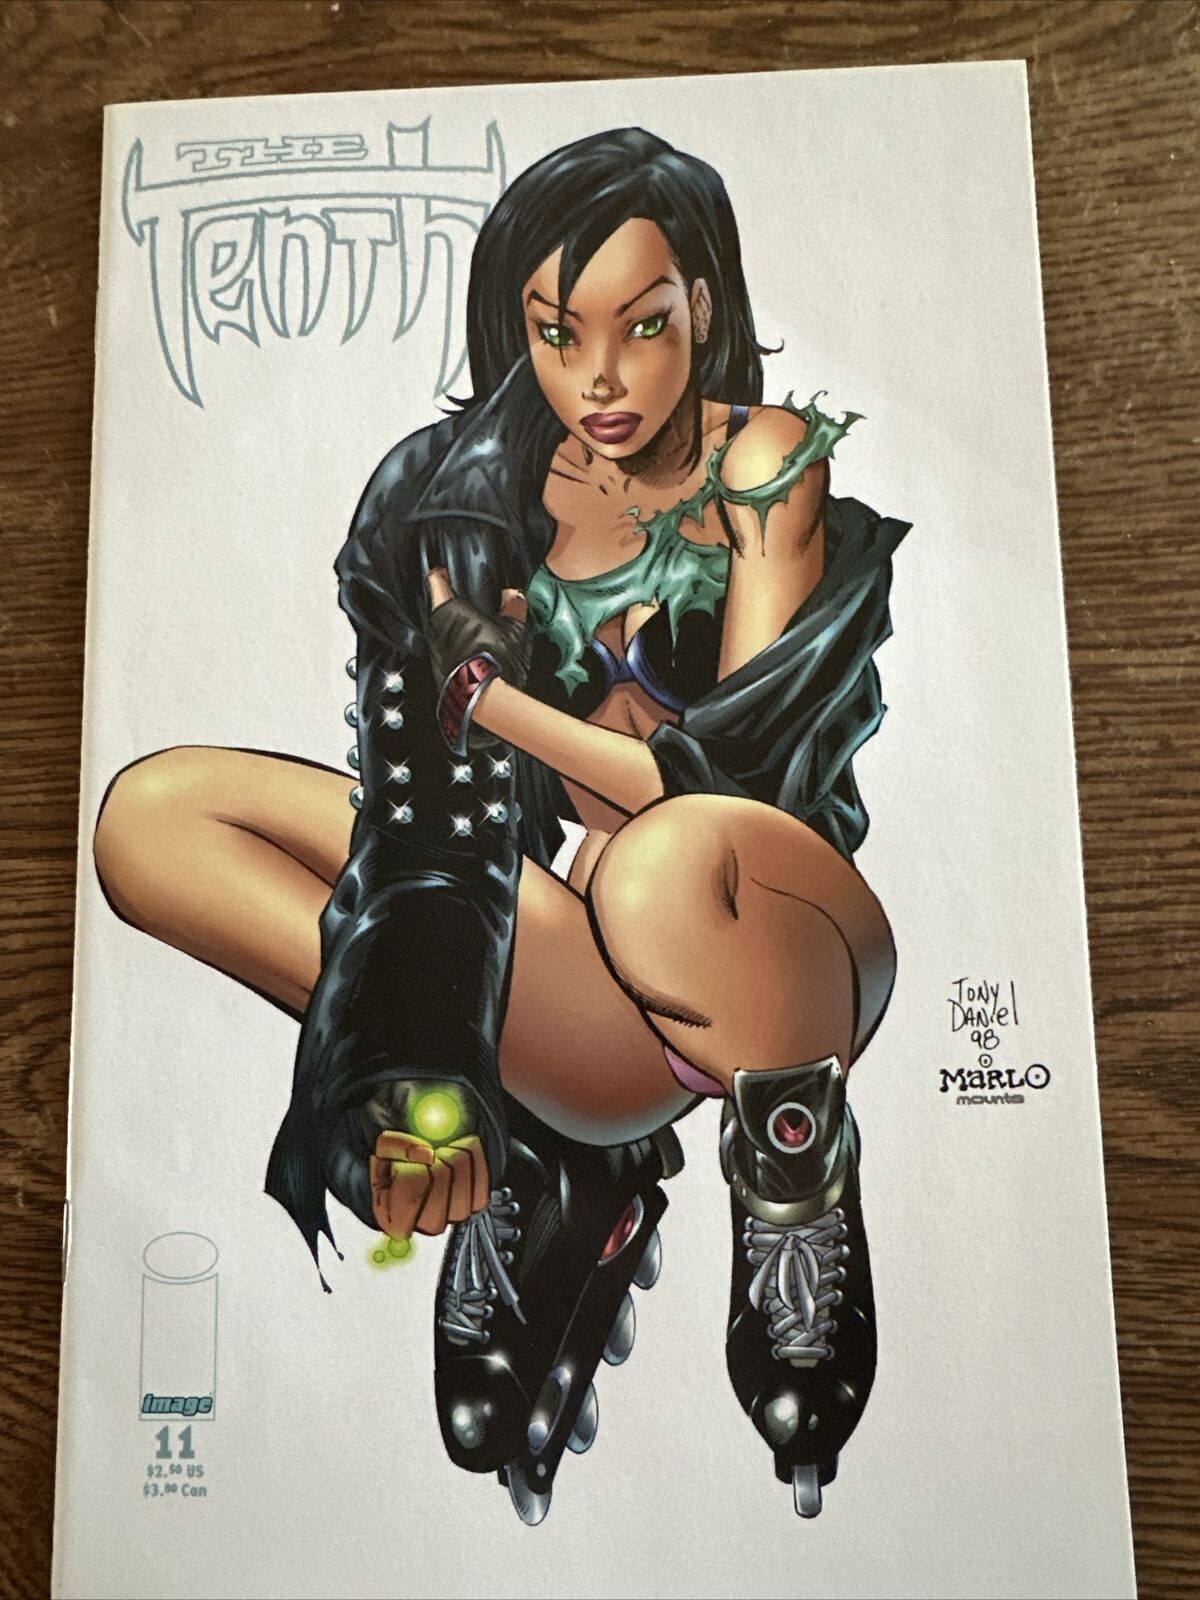 Vtg 1998 The Tenth #11 Super Sexy Variant Cover Image Comic - First Print-nr-(o)